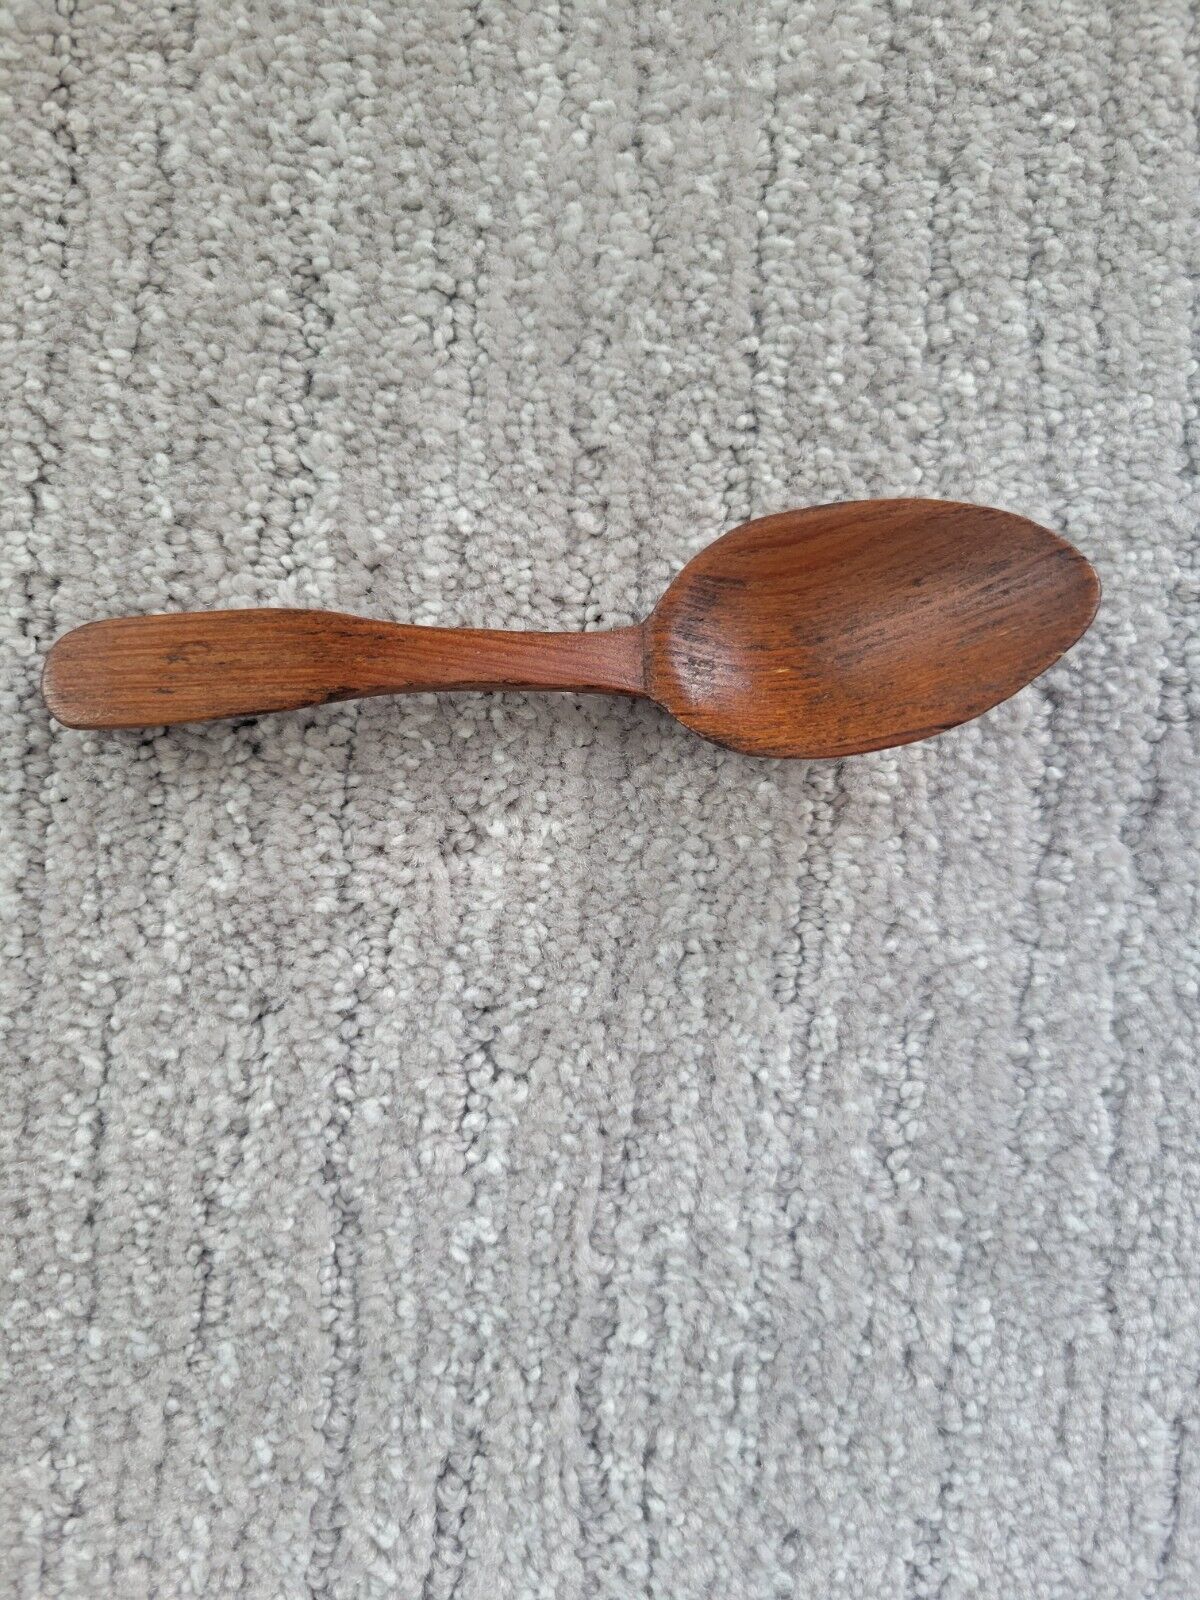 Vintage Hand Carved Wooden Spoon - Dated 1905